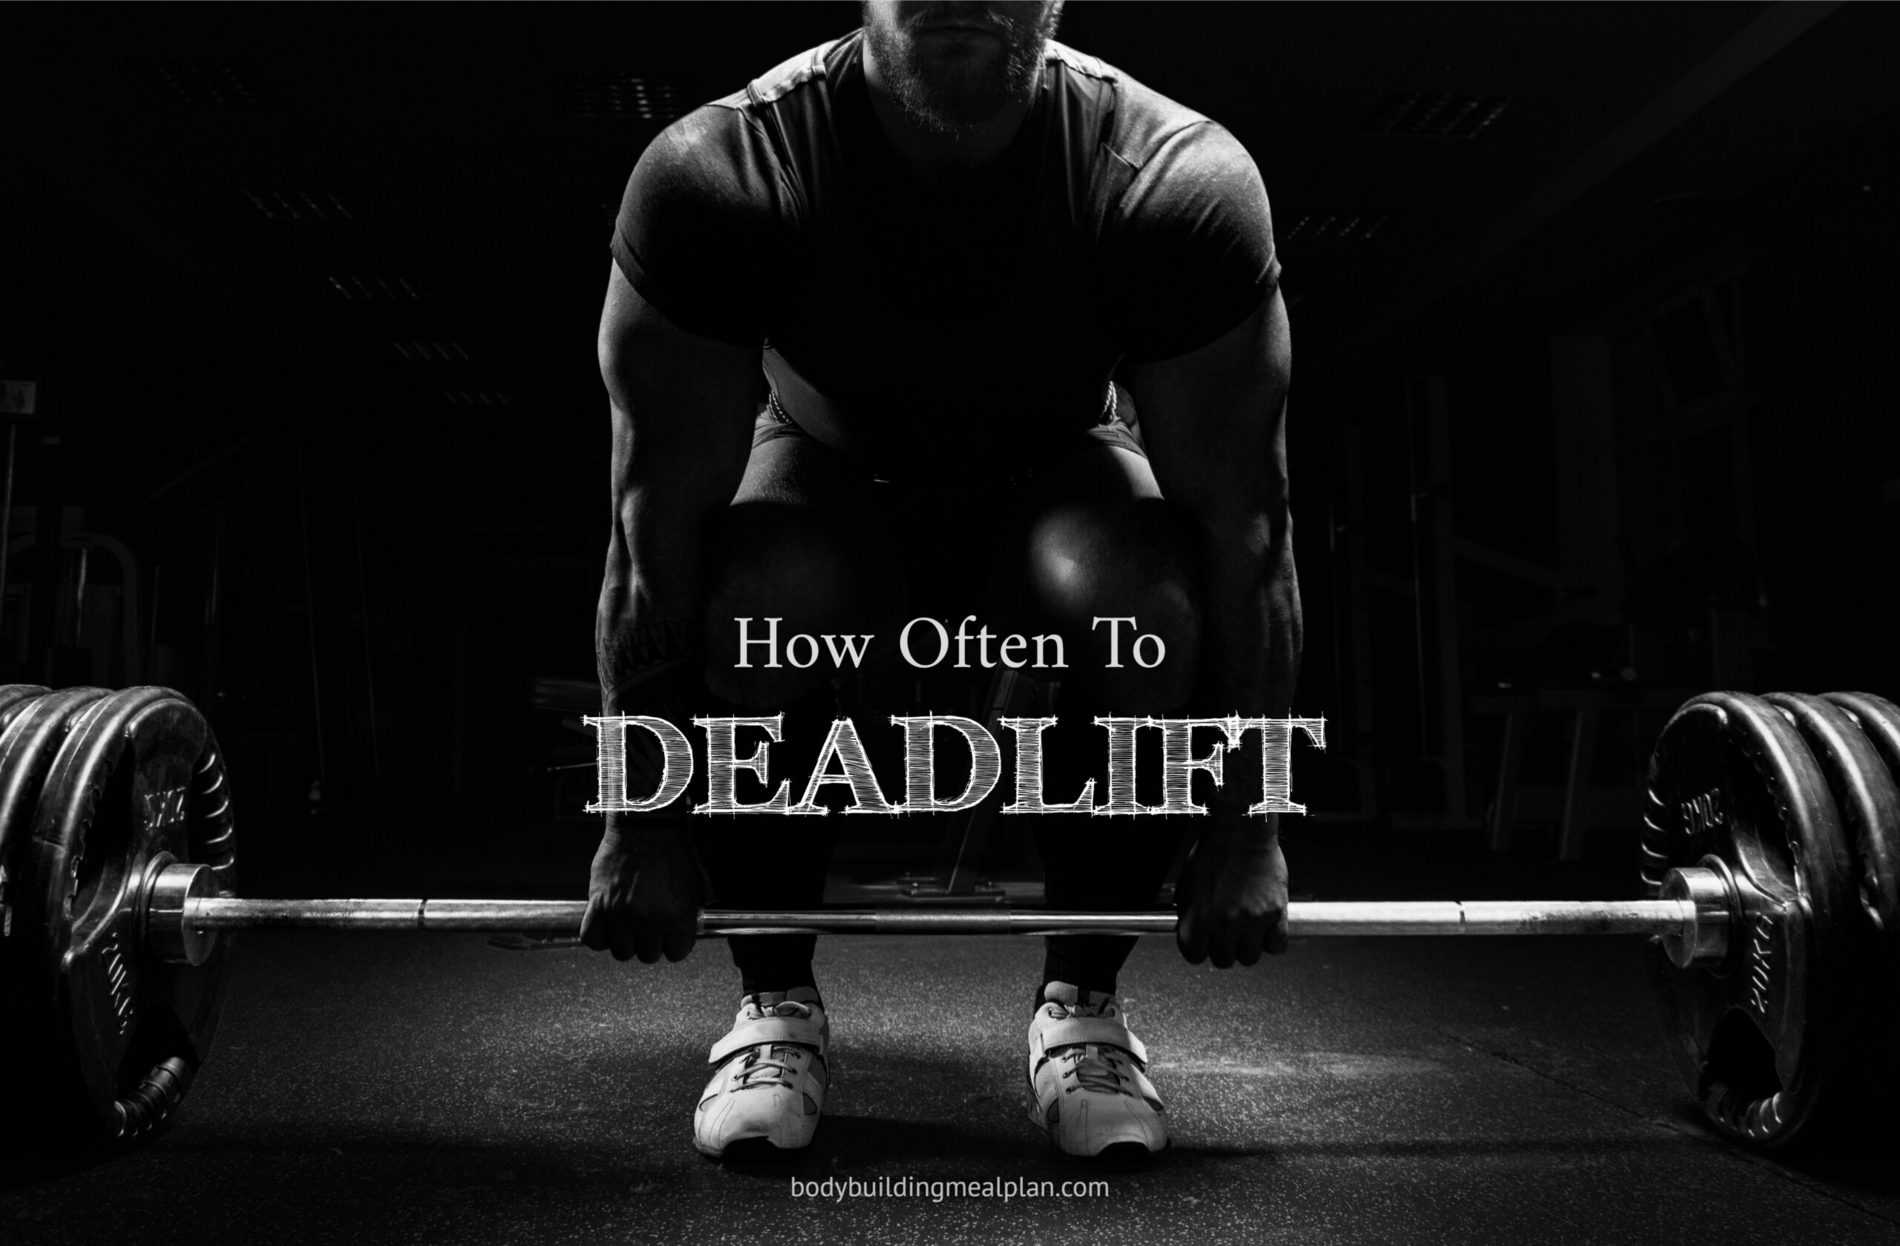 What Does PR Mean In Gym - Deadlift